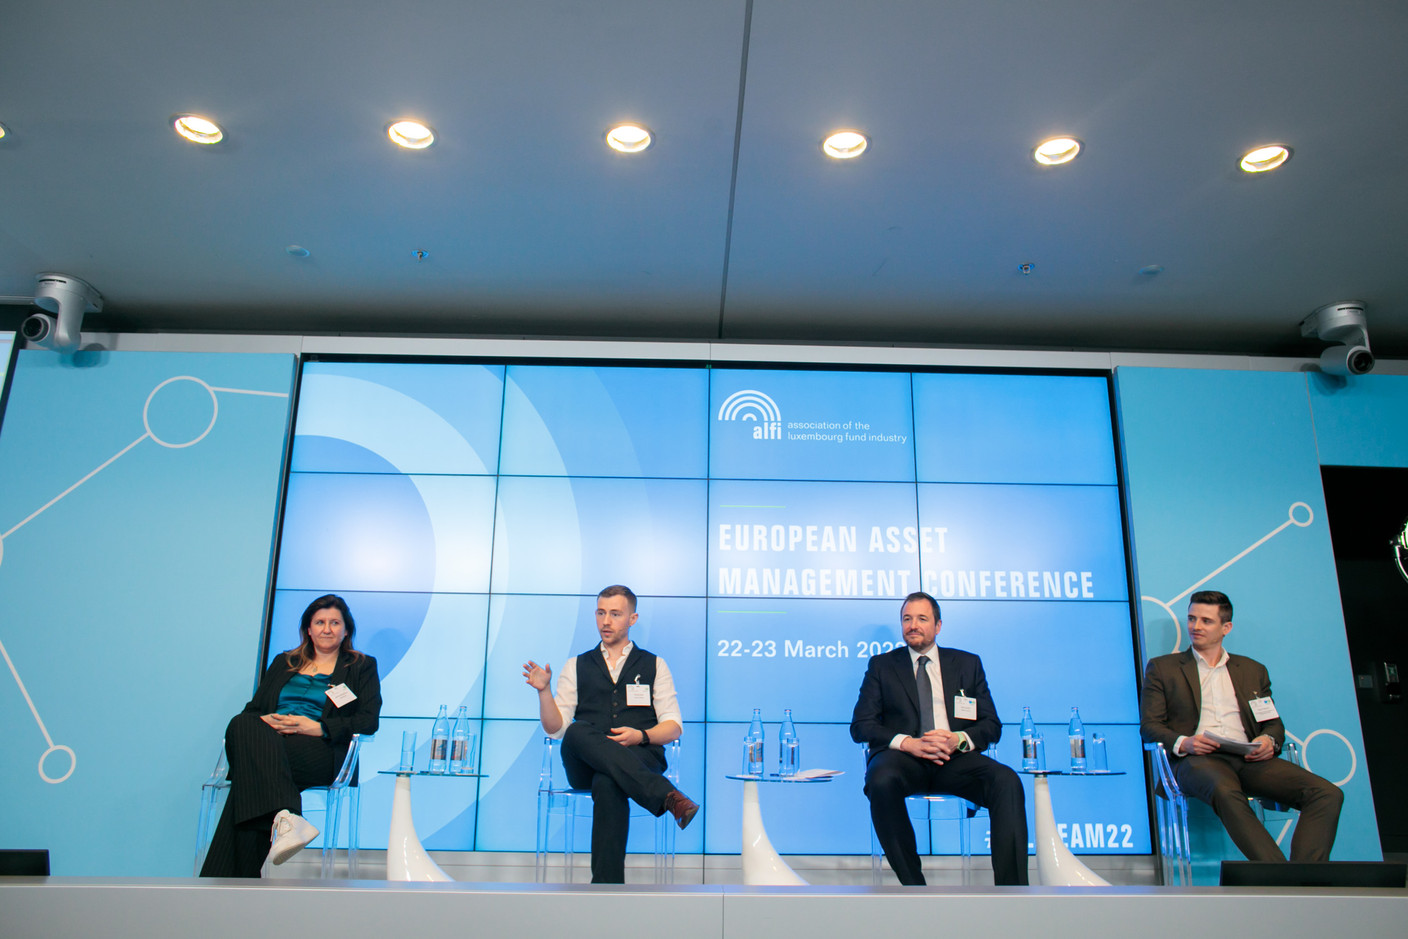 Simona Stoytchkova of State Street, Dimitrij Gede of Iconic Holding, Steve Jacoby of Clifford Chance and Patrick Hoffmann of the Luxembourg financial regulator CSSF are seen on the “Digital custody” panel at Alfi’s European Asset Management Conference, 23 March 2022. Photo: Matic Zorman